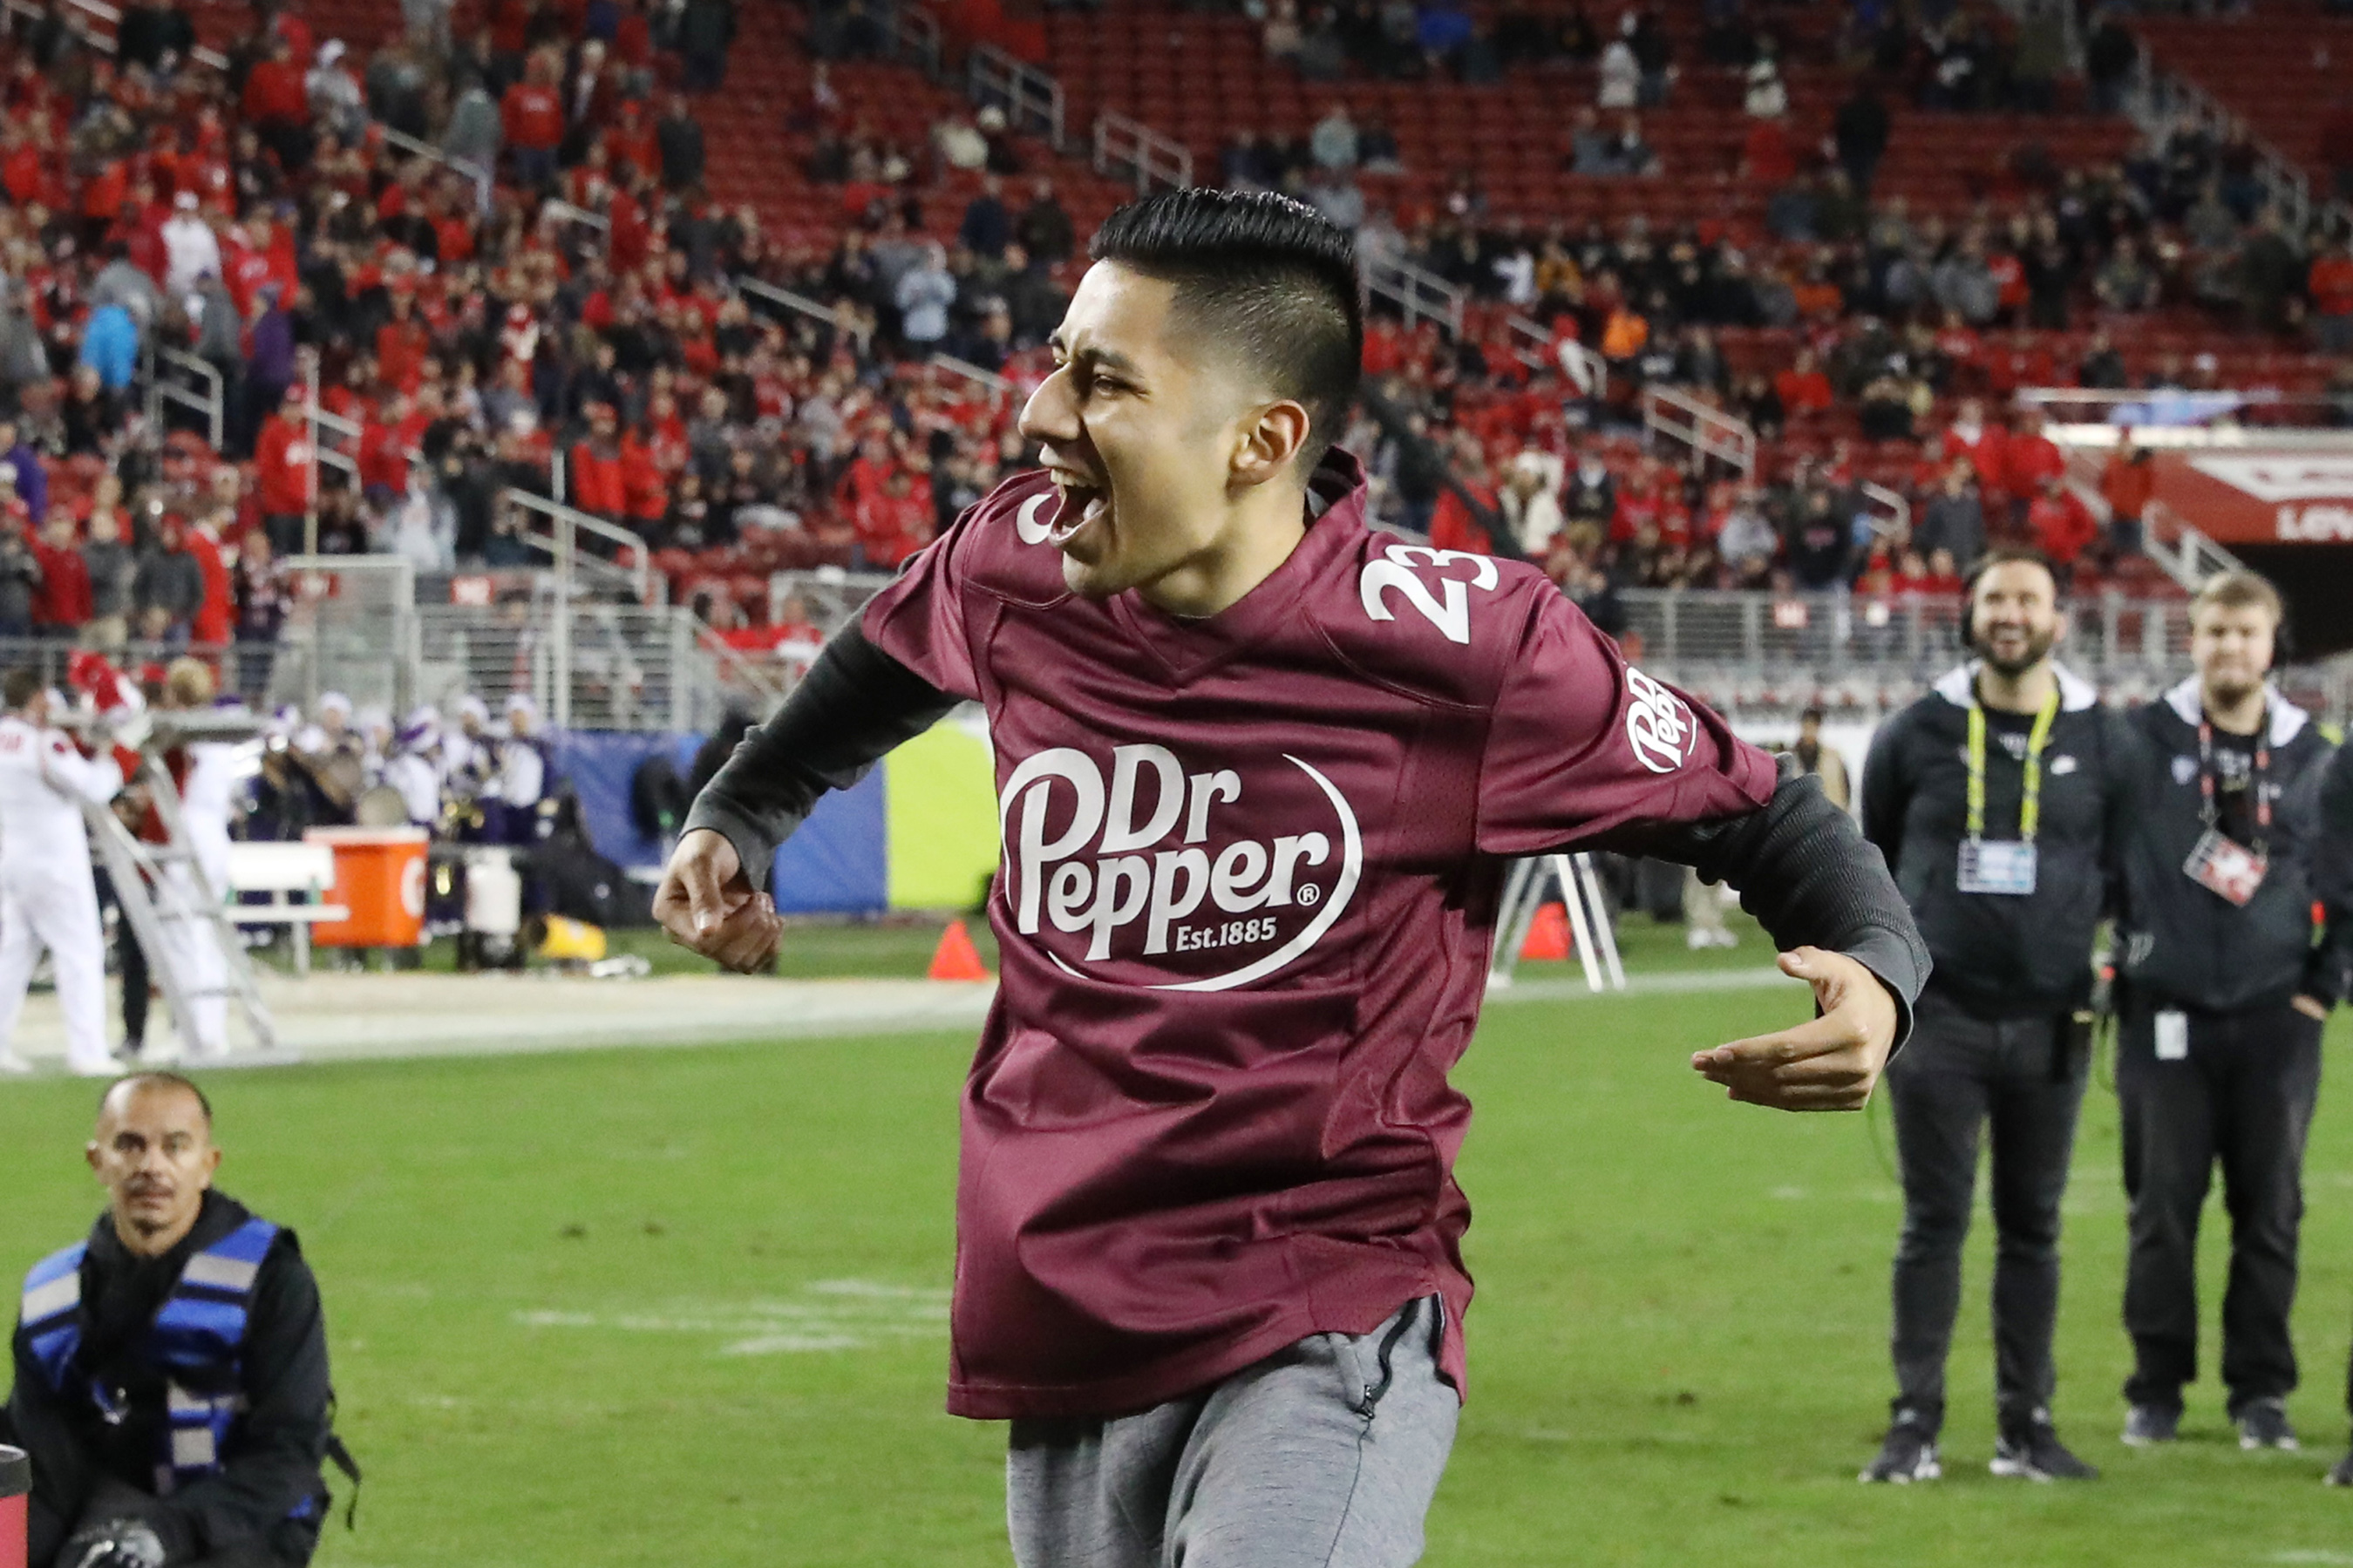 Alberto Reyes celebrates after winning $100,000 in tuition after competing in the Dr Pepper Tuition Giveaway during halftime of the PAC-12 Conference Championship